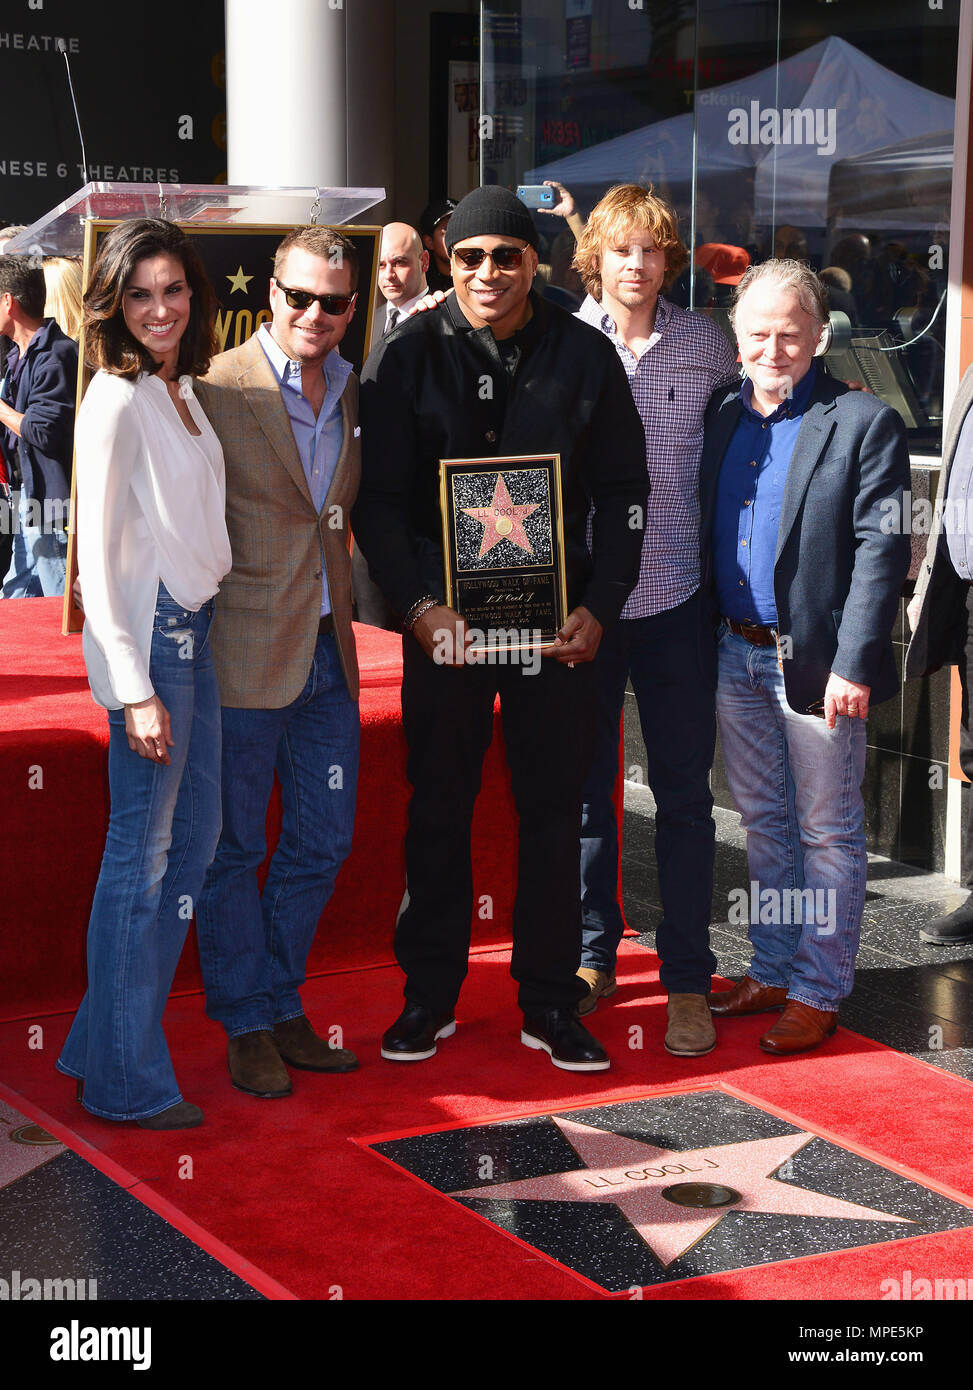 LL Cool J Star 021 cast of NCIS- Los Angeles  at LL Cool Honored with a Star on the Hollywood Walk Of fame in Los Angeles. January 21, 2016.LL Cool J Star 021 cast of NCIS- Los Angeles   Event in Hollywood Life - California, Red Carpet Event, USA, Film Industry, Celebrities, Photography, Bestof, Arts Culture and Entertainment, Topix Celebrities fashion, Best of, Hollywood Life, Event in Hollywood Life - California, Red Carpet and backstage, movie celebrities, TV celebrities, Music celebrities, Arts Culture and Entertainment, vertical, one person, Photography,    inquiry tsuni@Gamma-USA.com , C Stock Photo